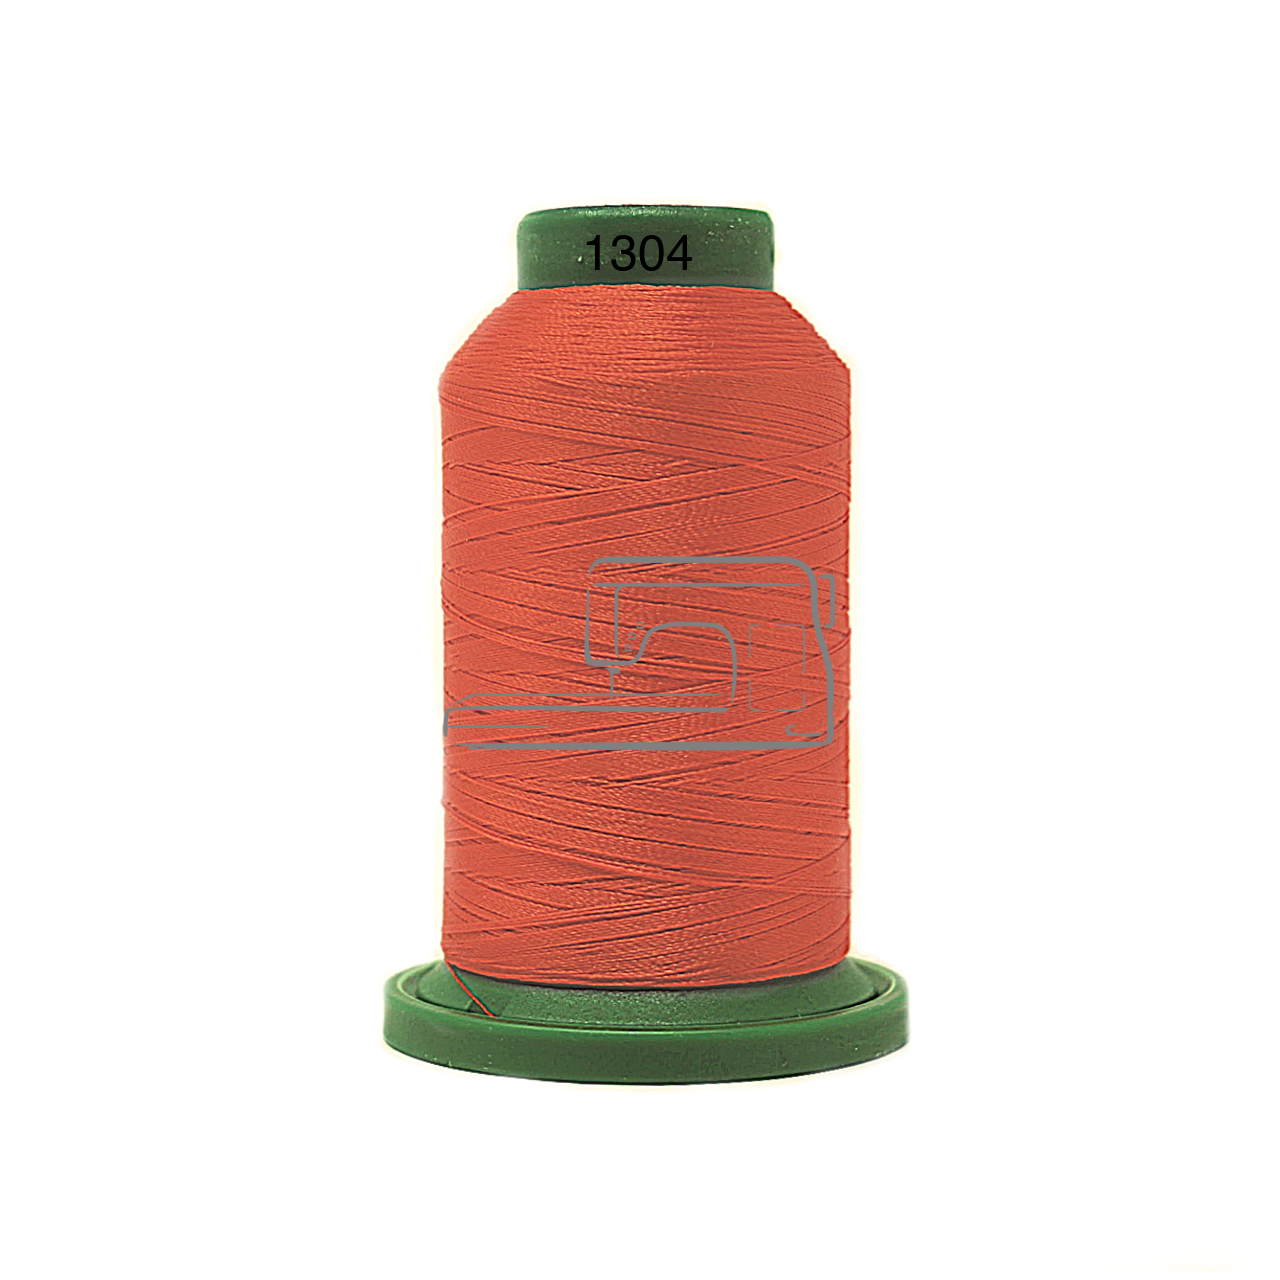 Isacord Isacord sewing and embroidery thread 1304